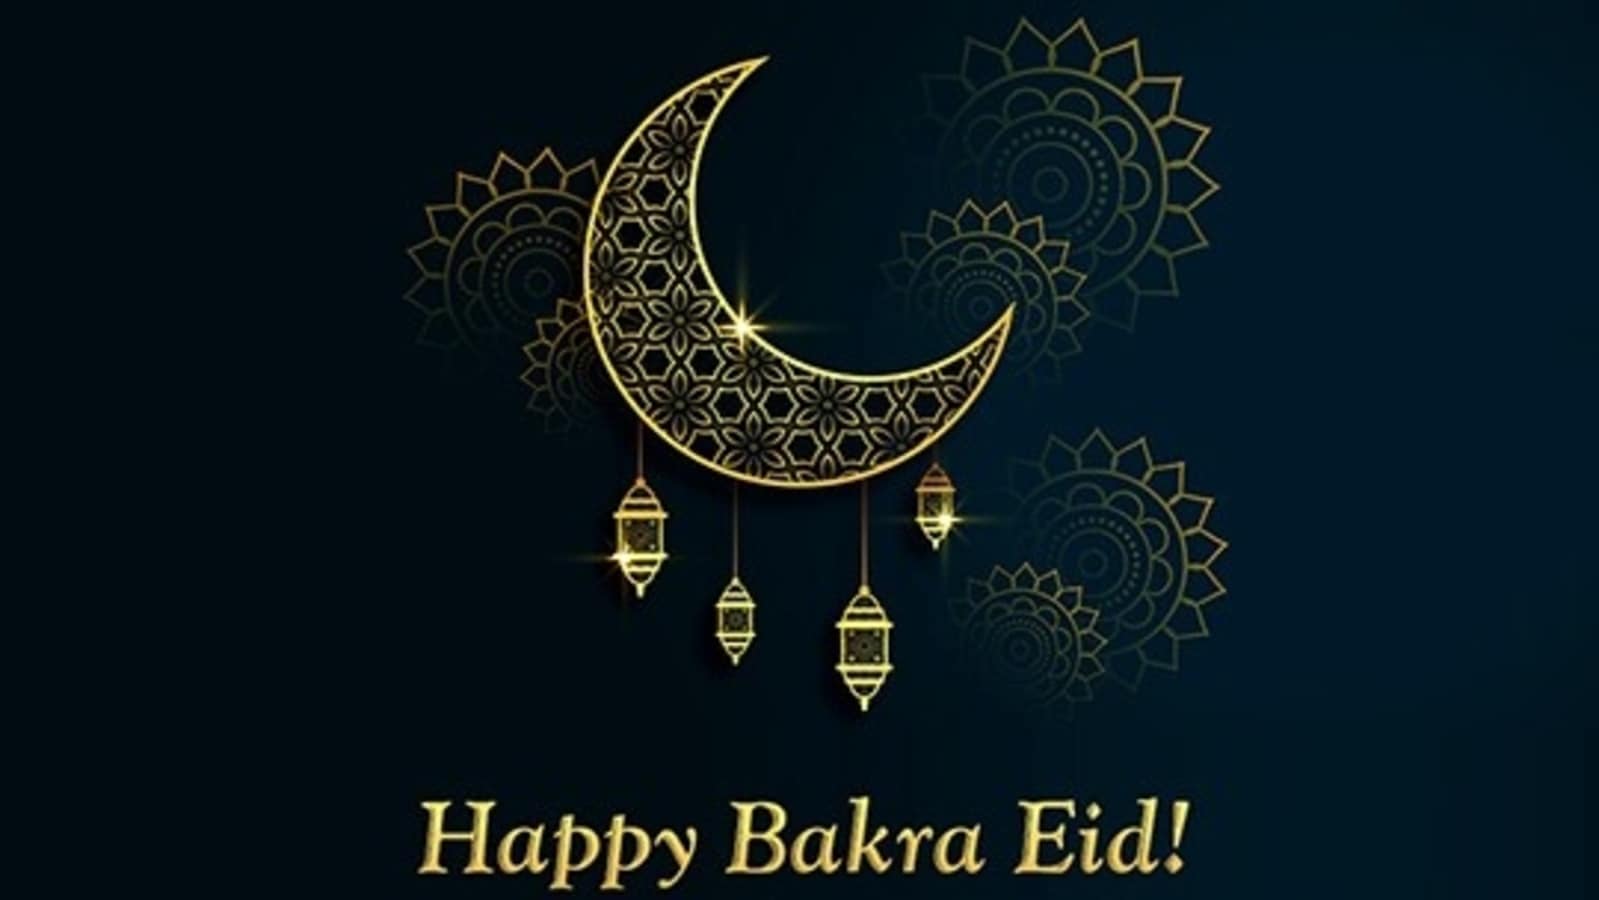 Happy Eid alAdha Wishes, images, to share with loved ones this Bakrid